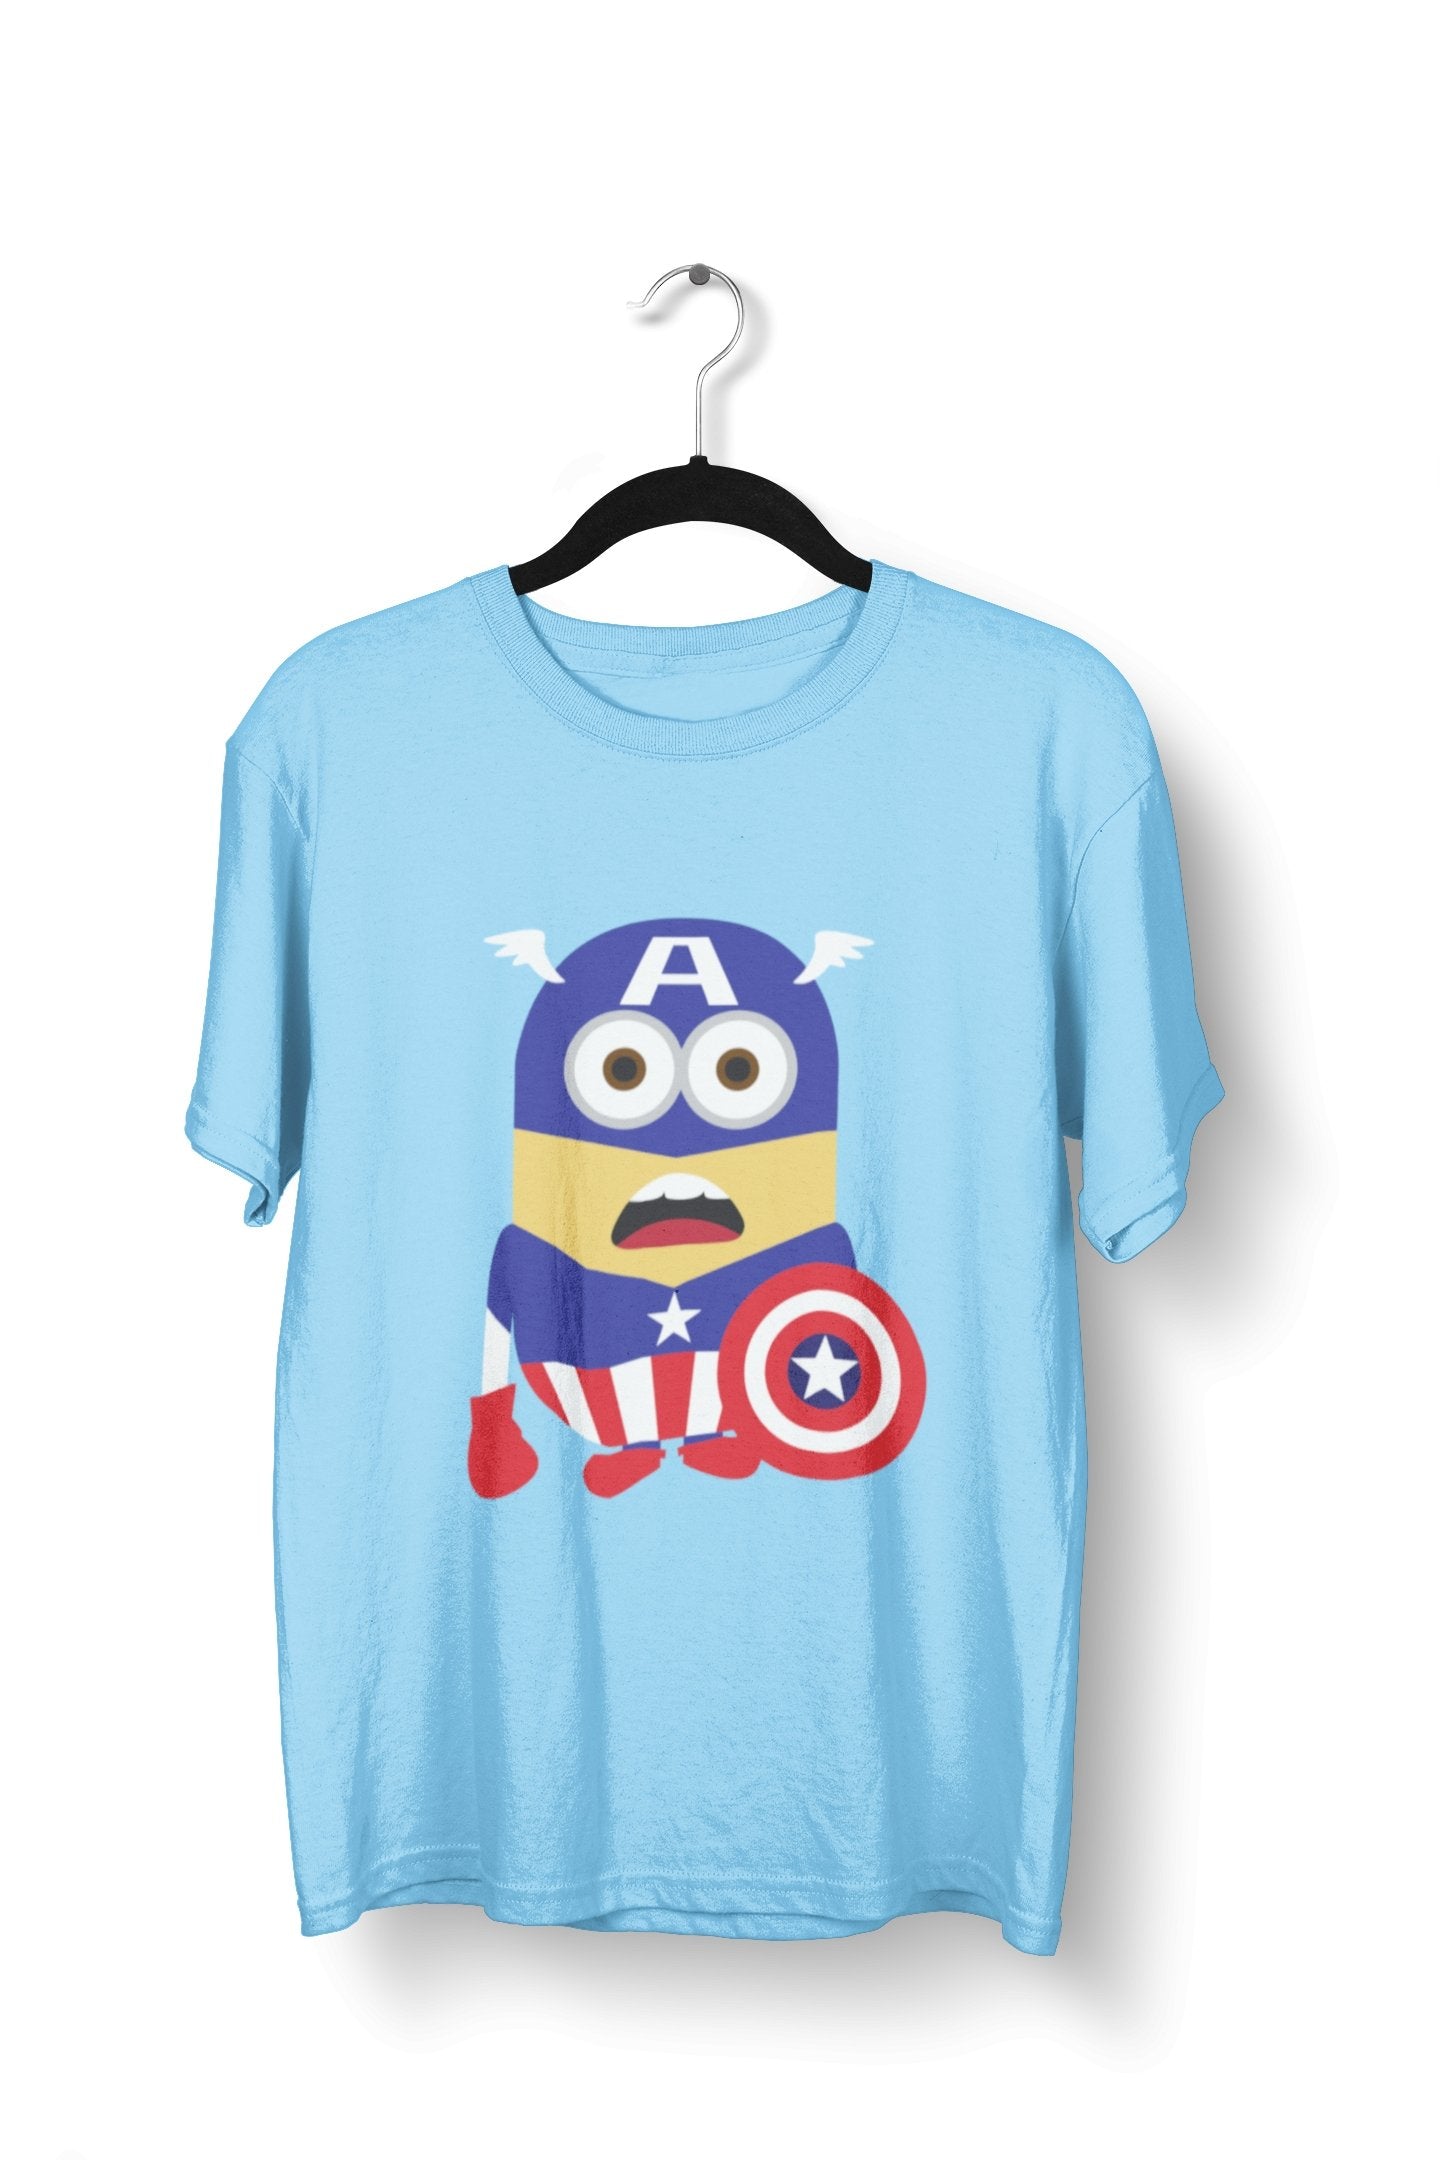 thelegalgang,Captain America Minion Graphic T-Shirt for Men,.